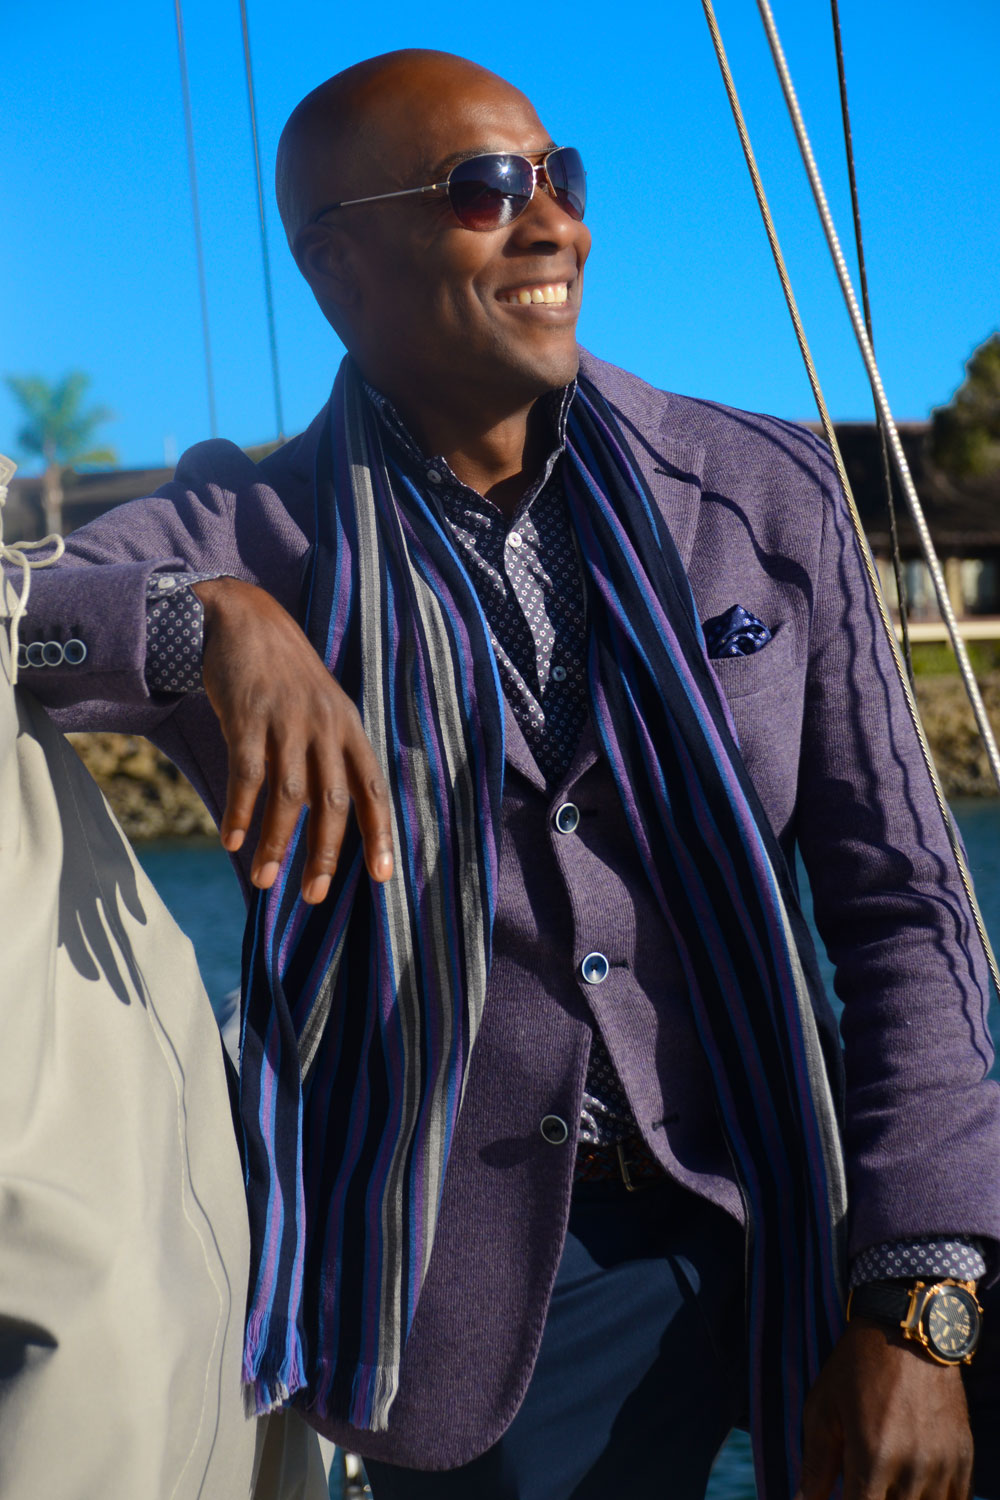 Image of Carlton - dressed in Gemelli clothing, for his featured interview in FVM Global Magazine.